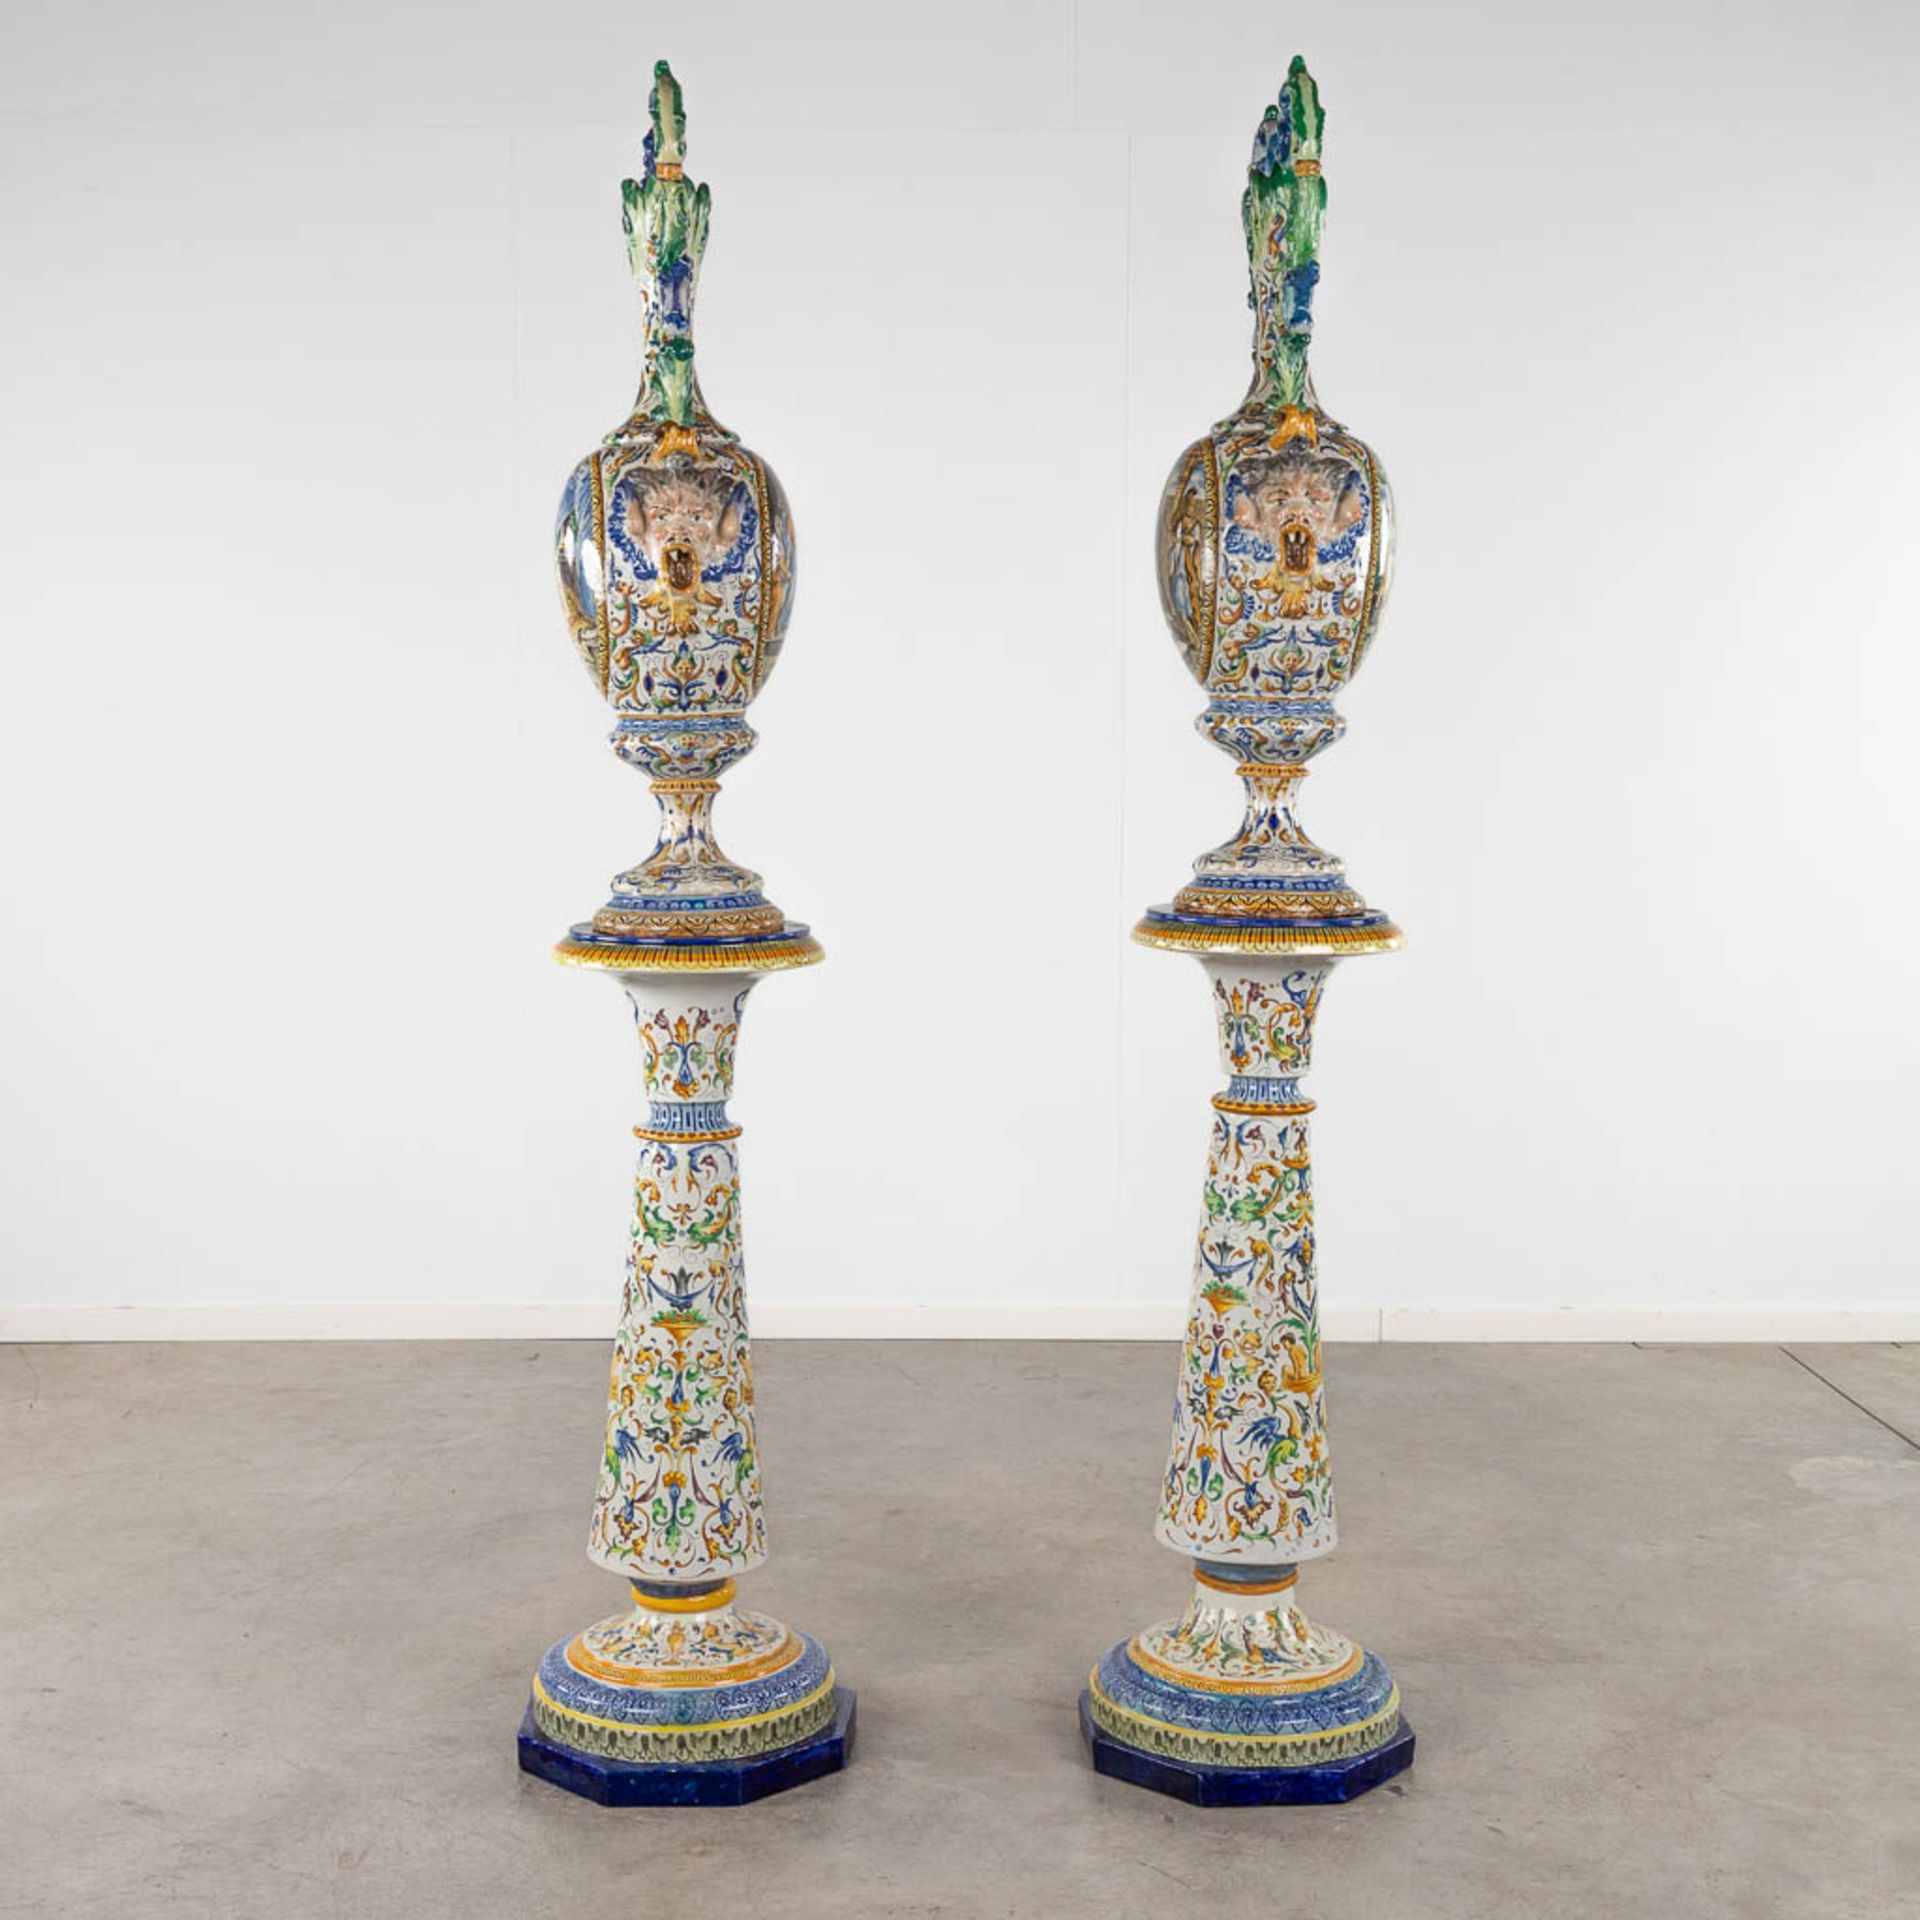 A pair of large vases, Italian Renaissance style, glazed faience. 20th C. (D:45 x W:45 x H:205 cm) - Image 27 of 31